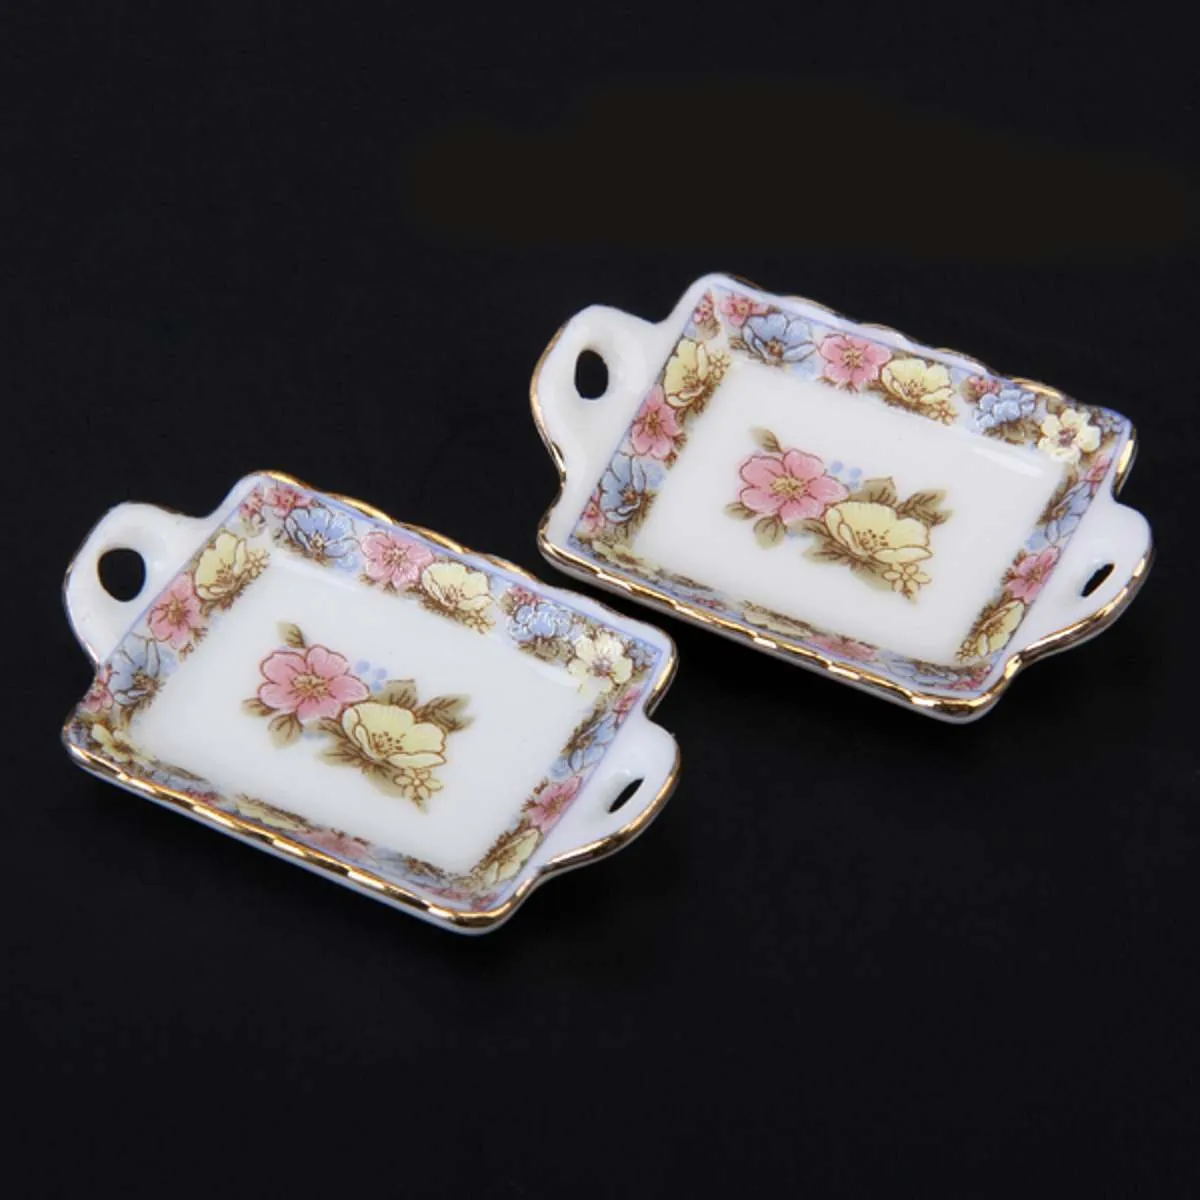 Dollhouse Miniature Dining Ware Porcelain Tea Set Dish Cup Bowl Plate Furniture Toy Gift Colorful Floral Print Table Decor Y5394690